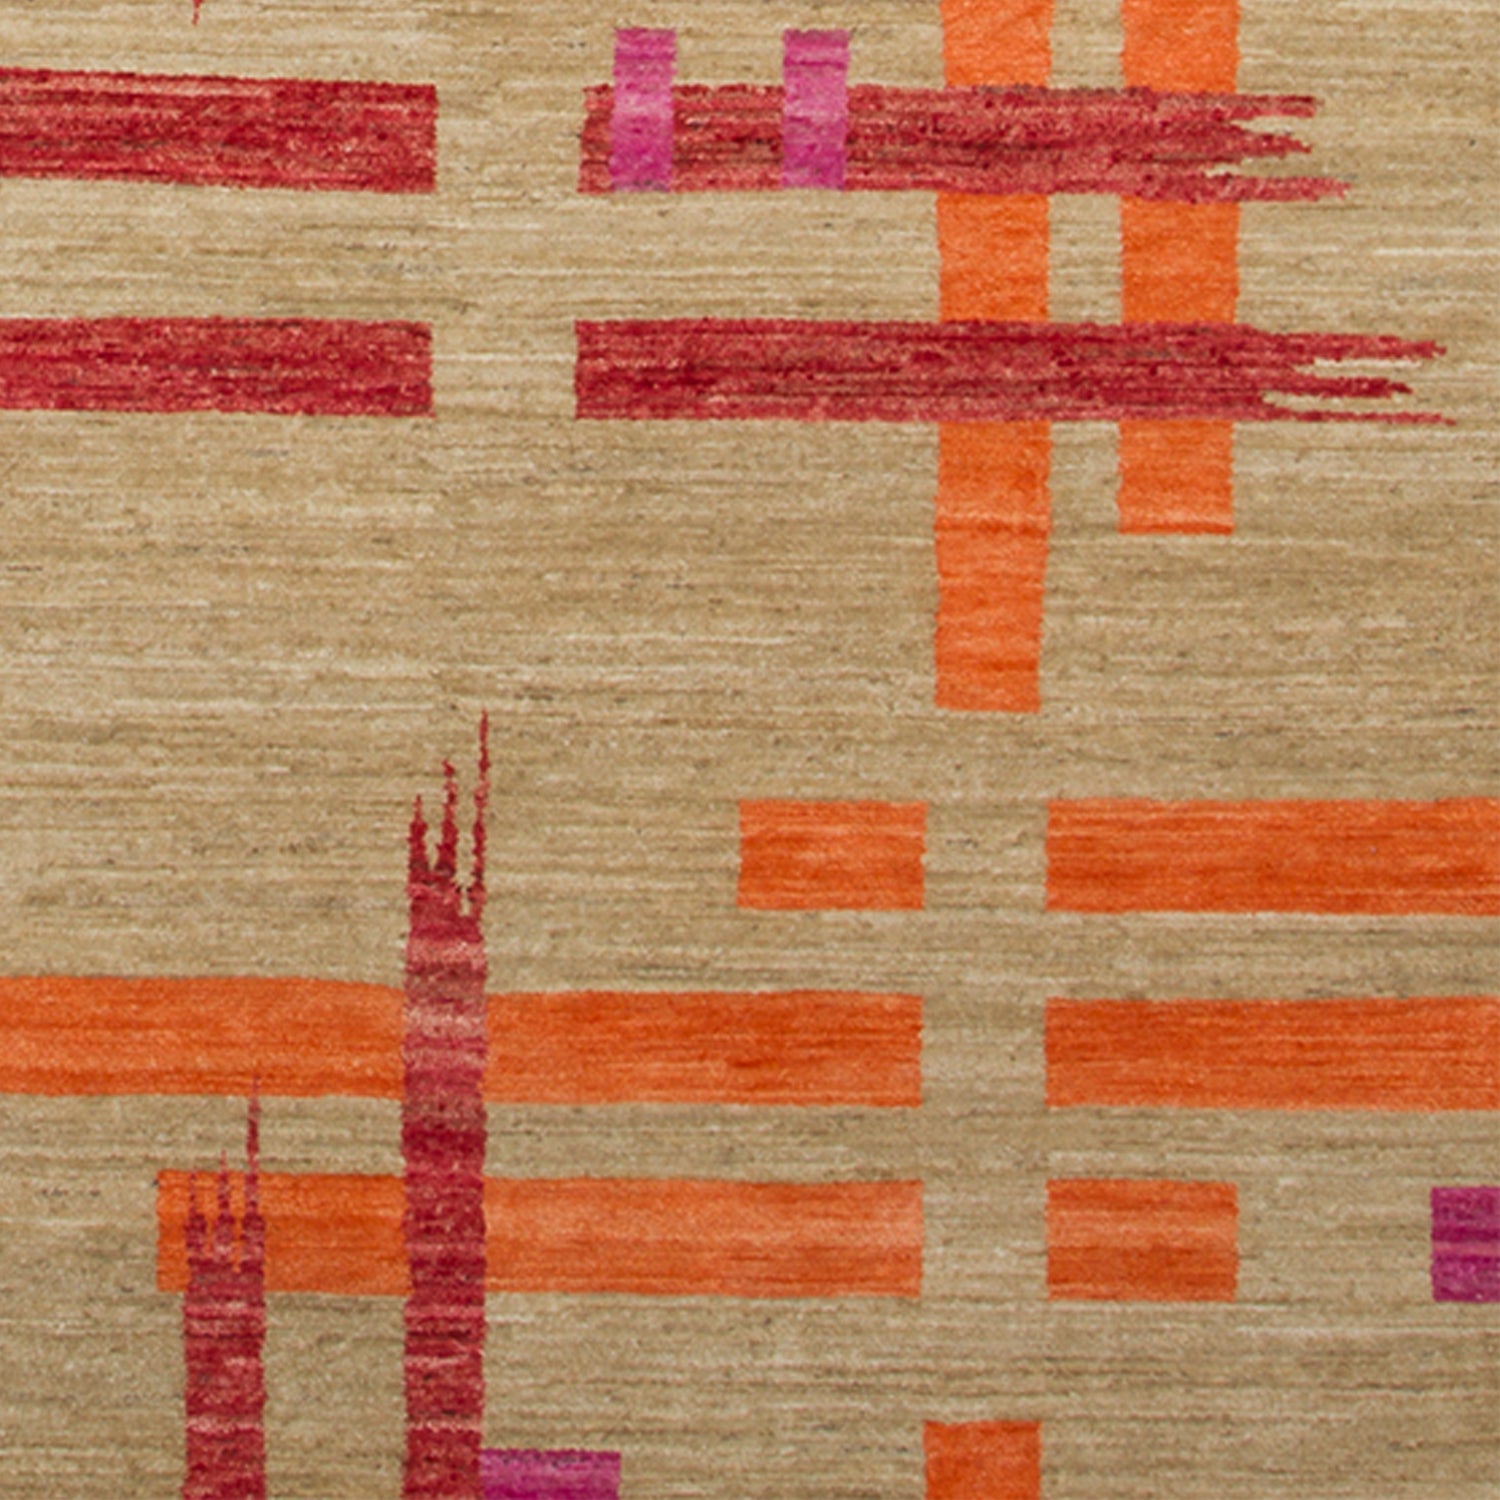 Woven rug swatch with an abstract pattern of bright-colored ribbons in shades of pink and orange on a tan field.